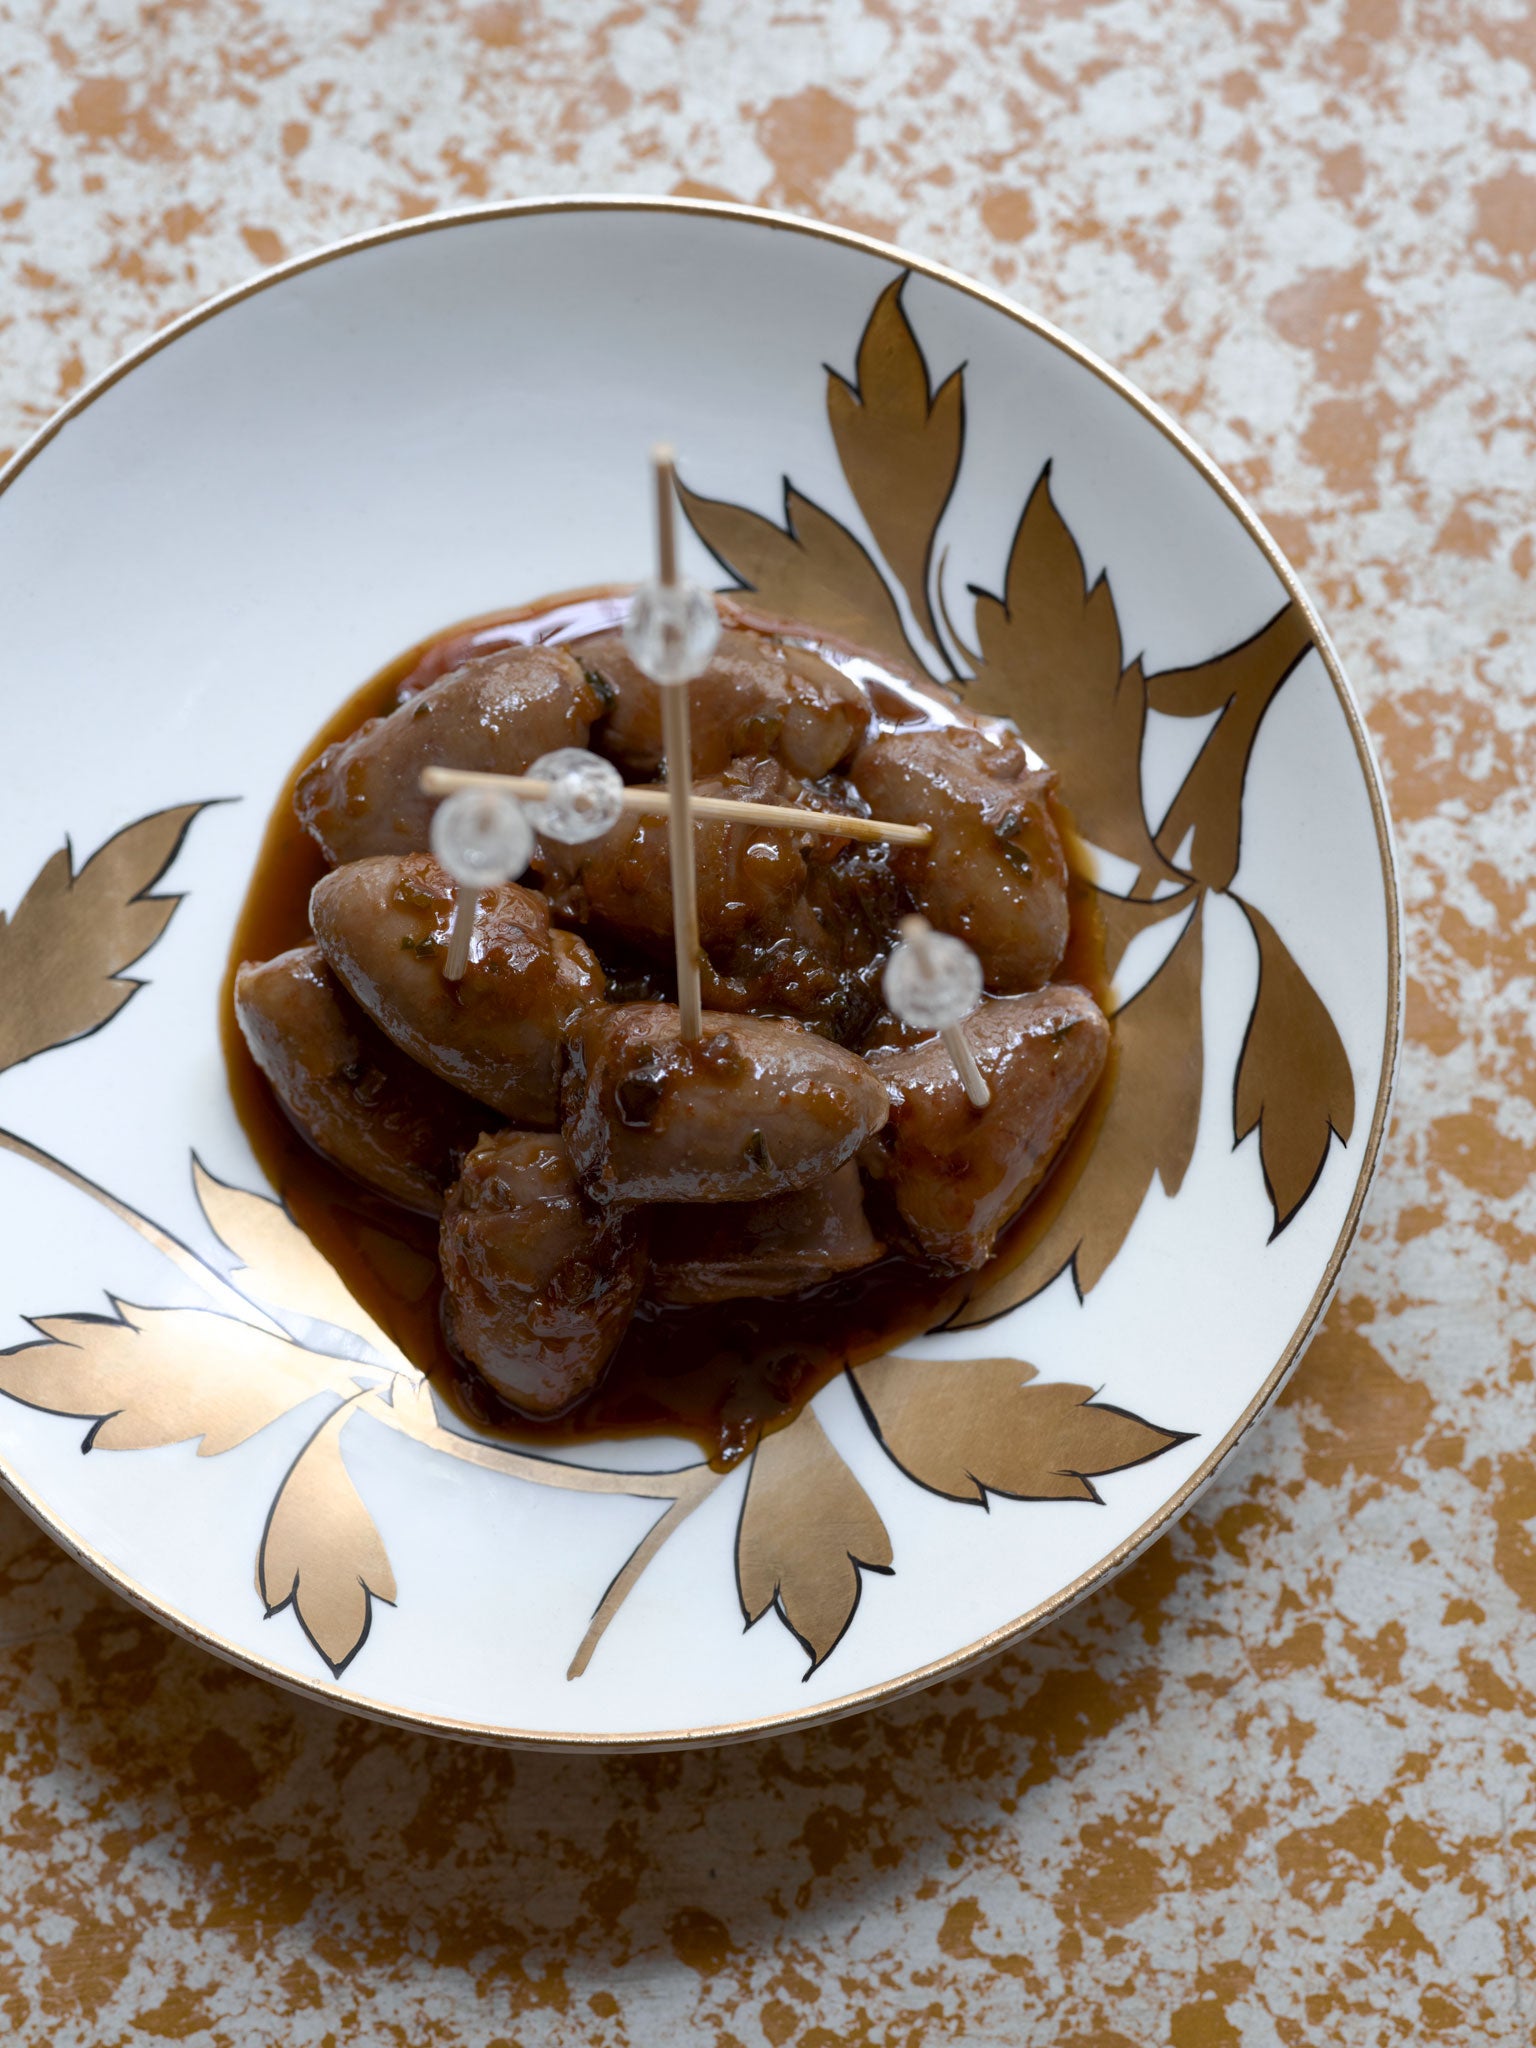 Arrange devilled chicken hearts on a serving dish with a few cocktail sticks, for ease of eating and sharing